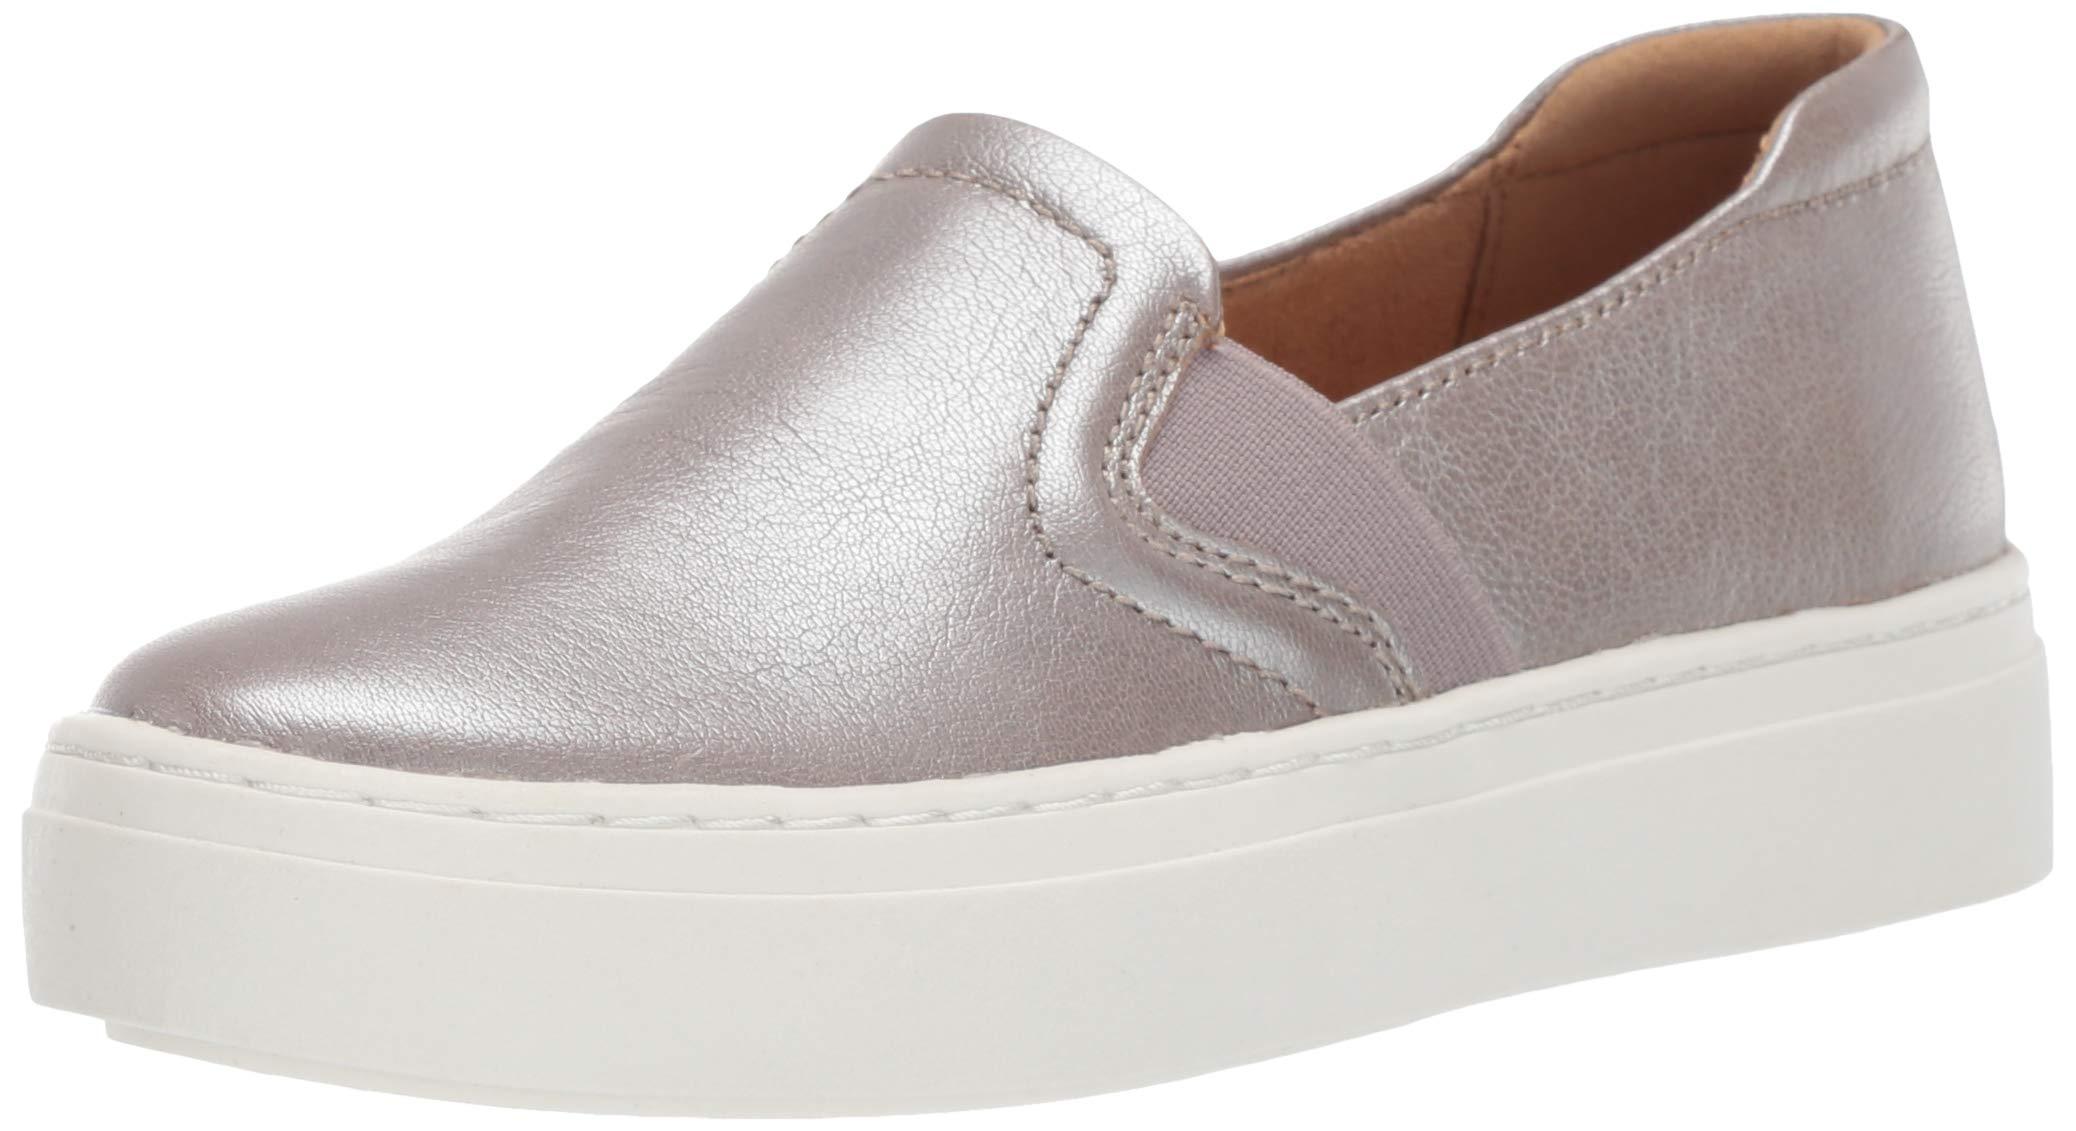 Naturalizer Carly 3 Shoe in Silver (Metallic) - Save 63% - Lyst